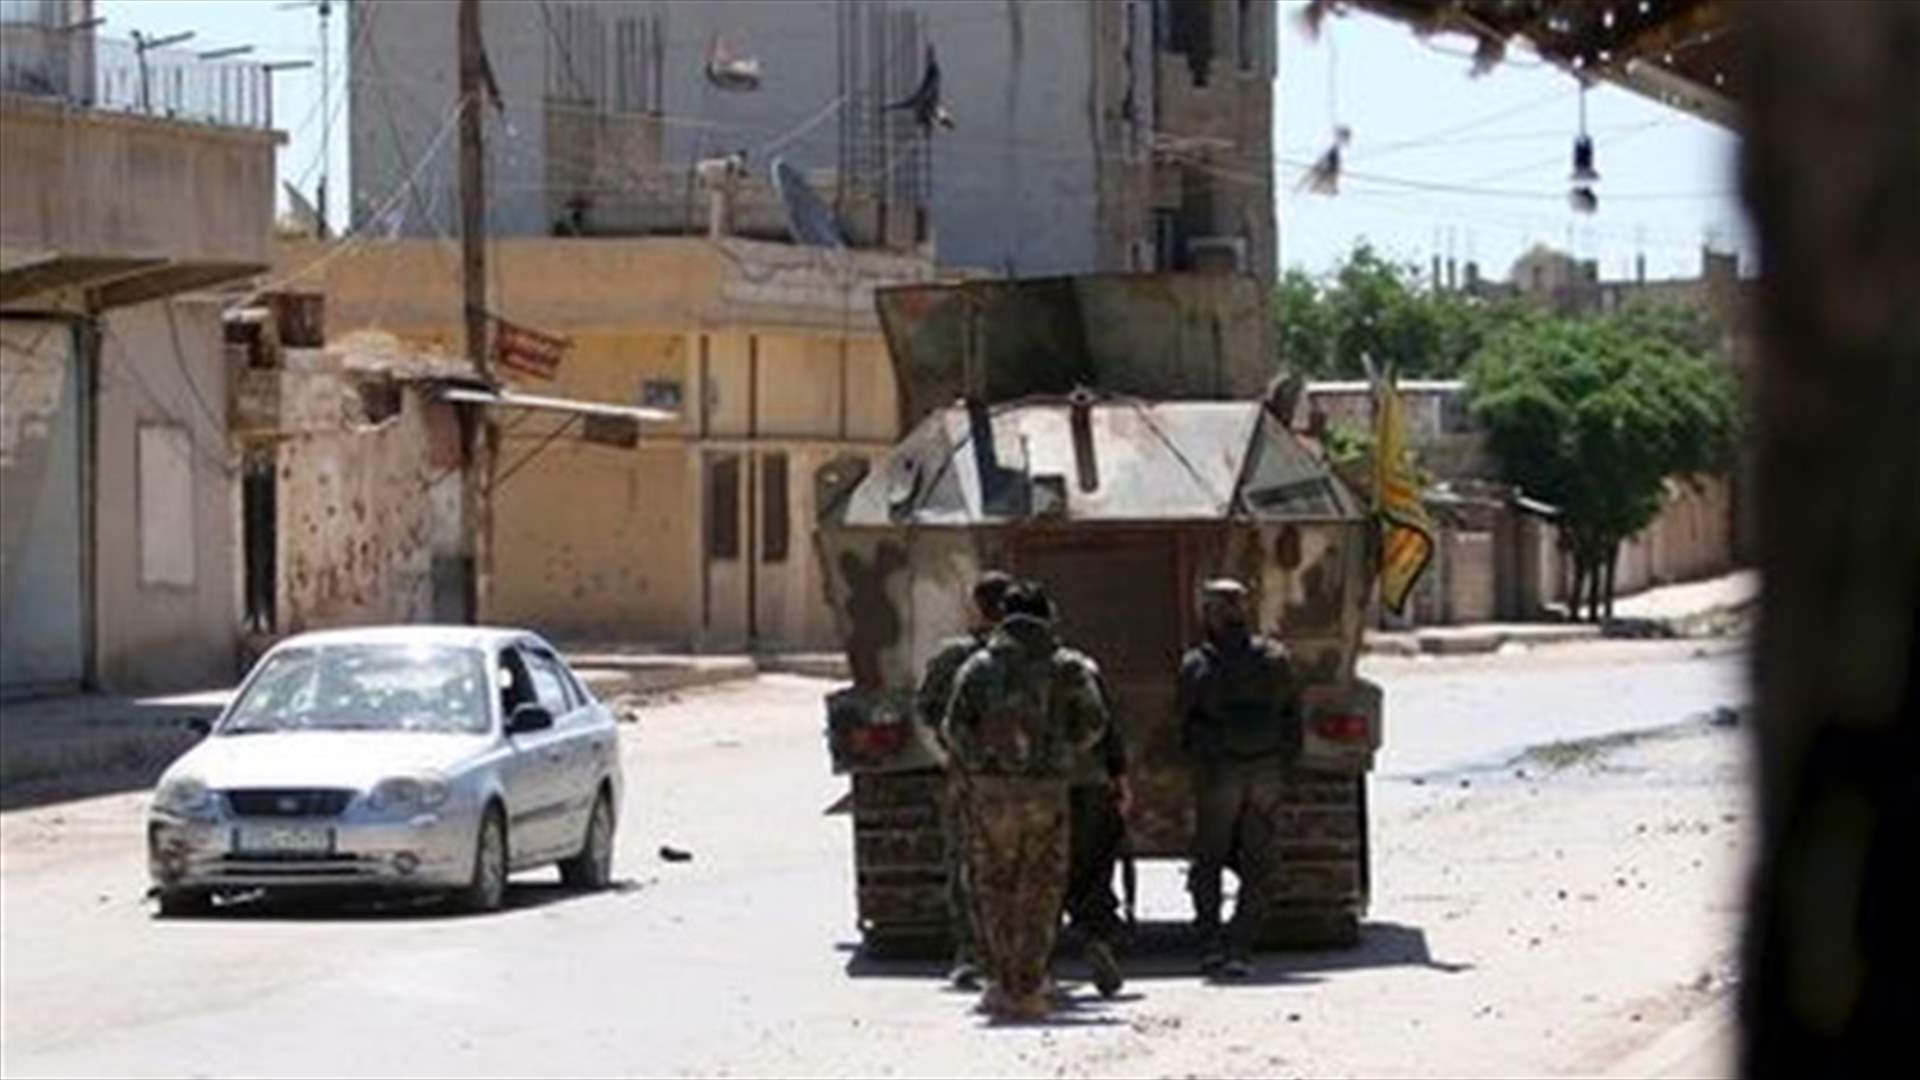 Kurdish, Syrian government forces declare truce in Qamishli area -statement